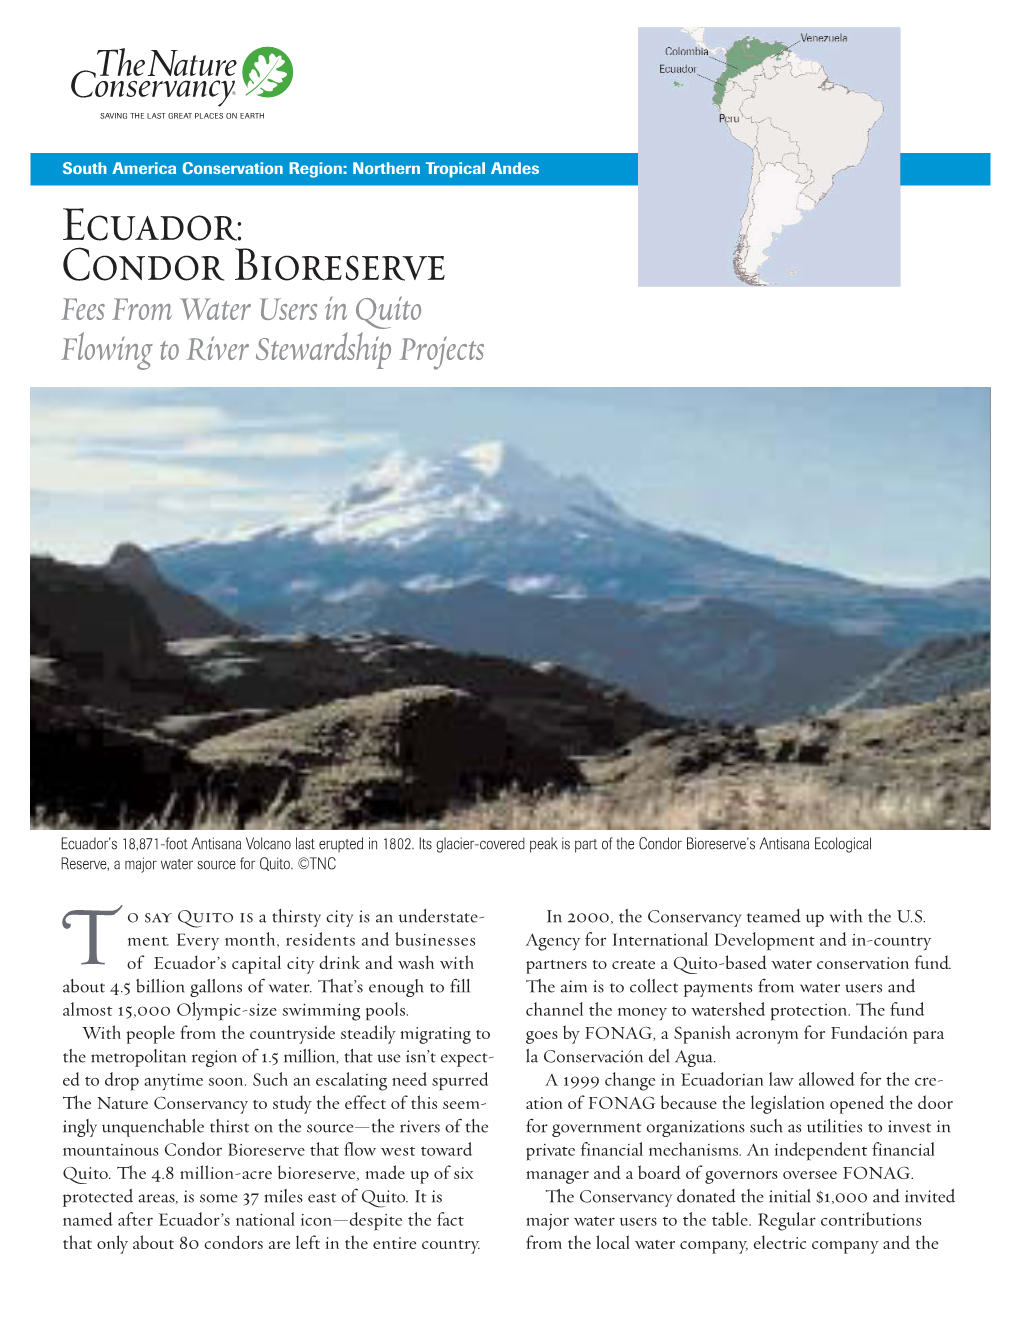 Ecuador: Condor Bioreserve Fees from Water Users in Quito Flowing to River Stewardship Projects